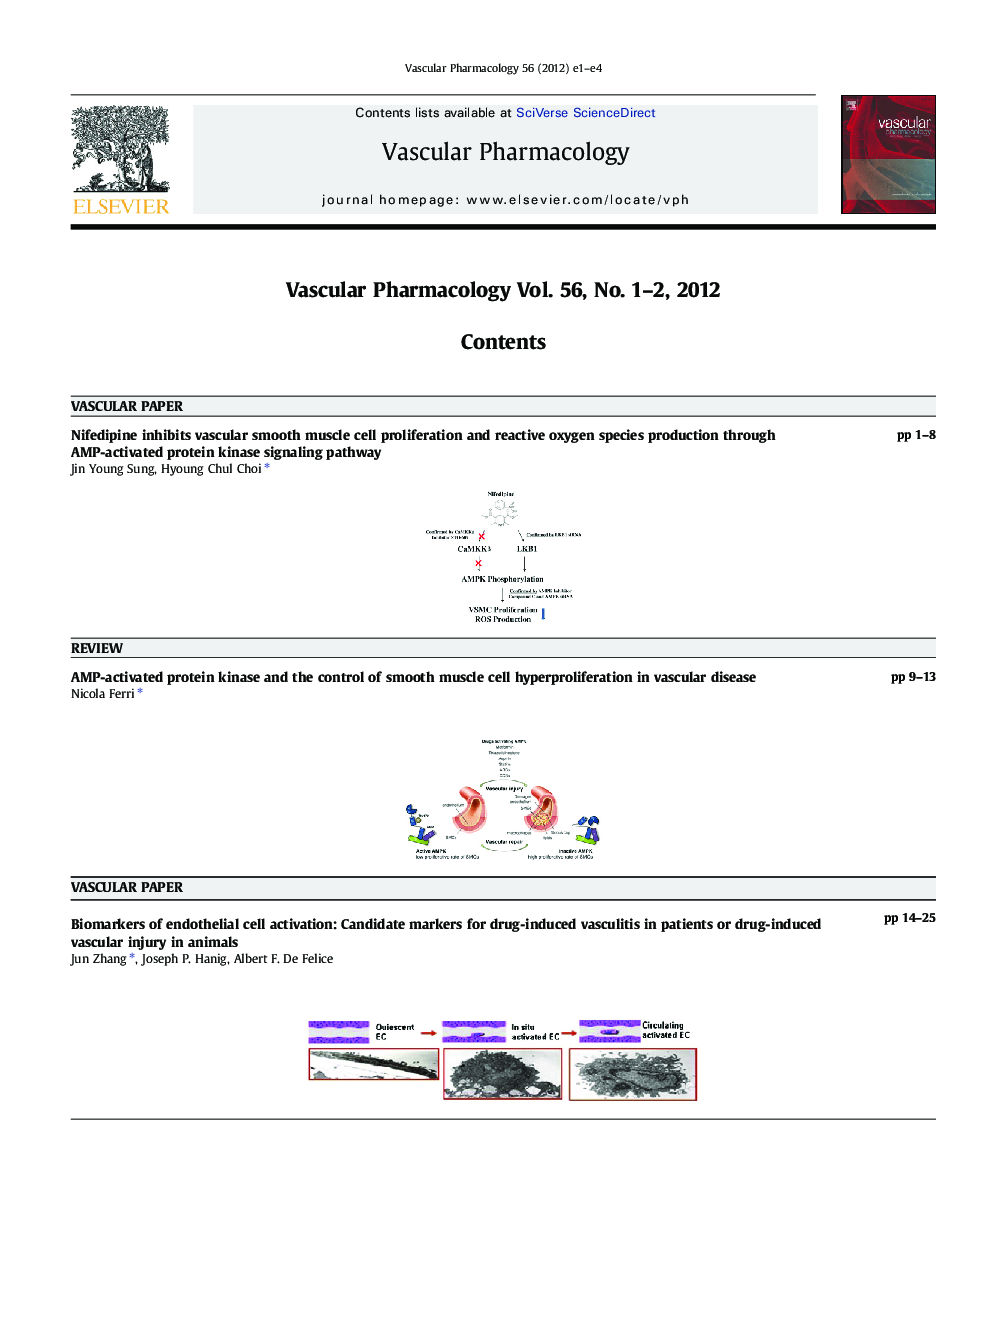 Graphical Abstracts Contents Listing